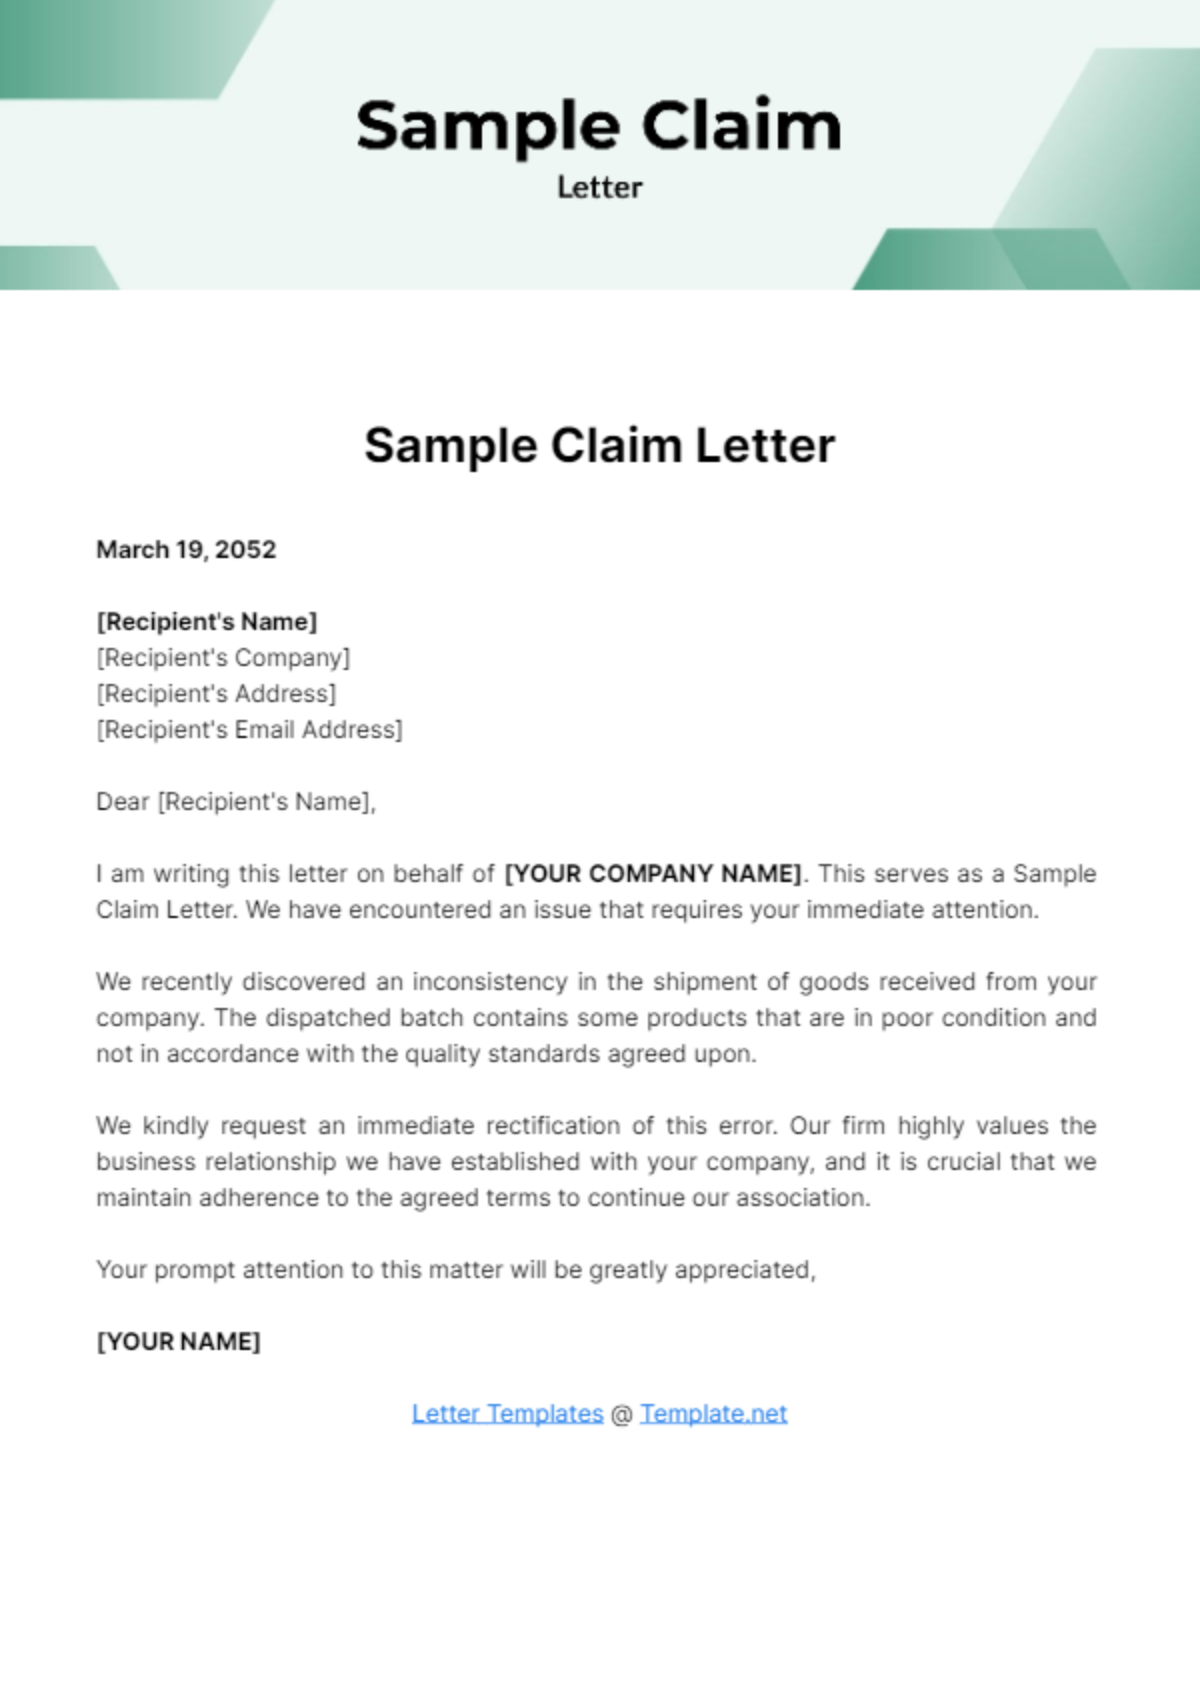 Free Sample Claim Letter Template